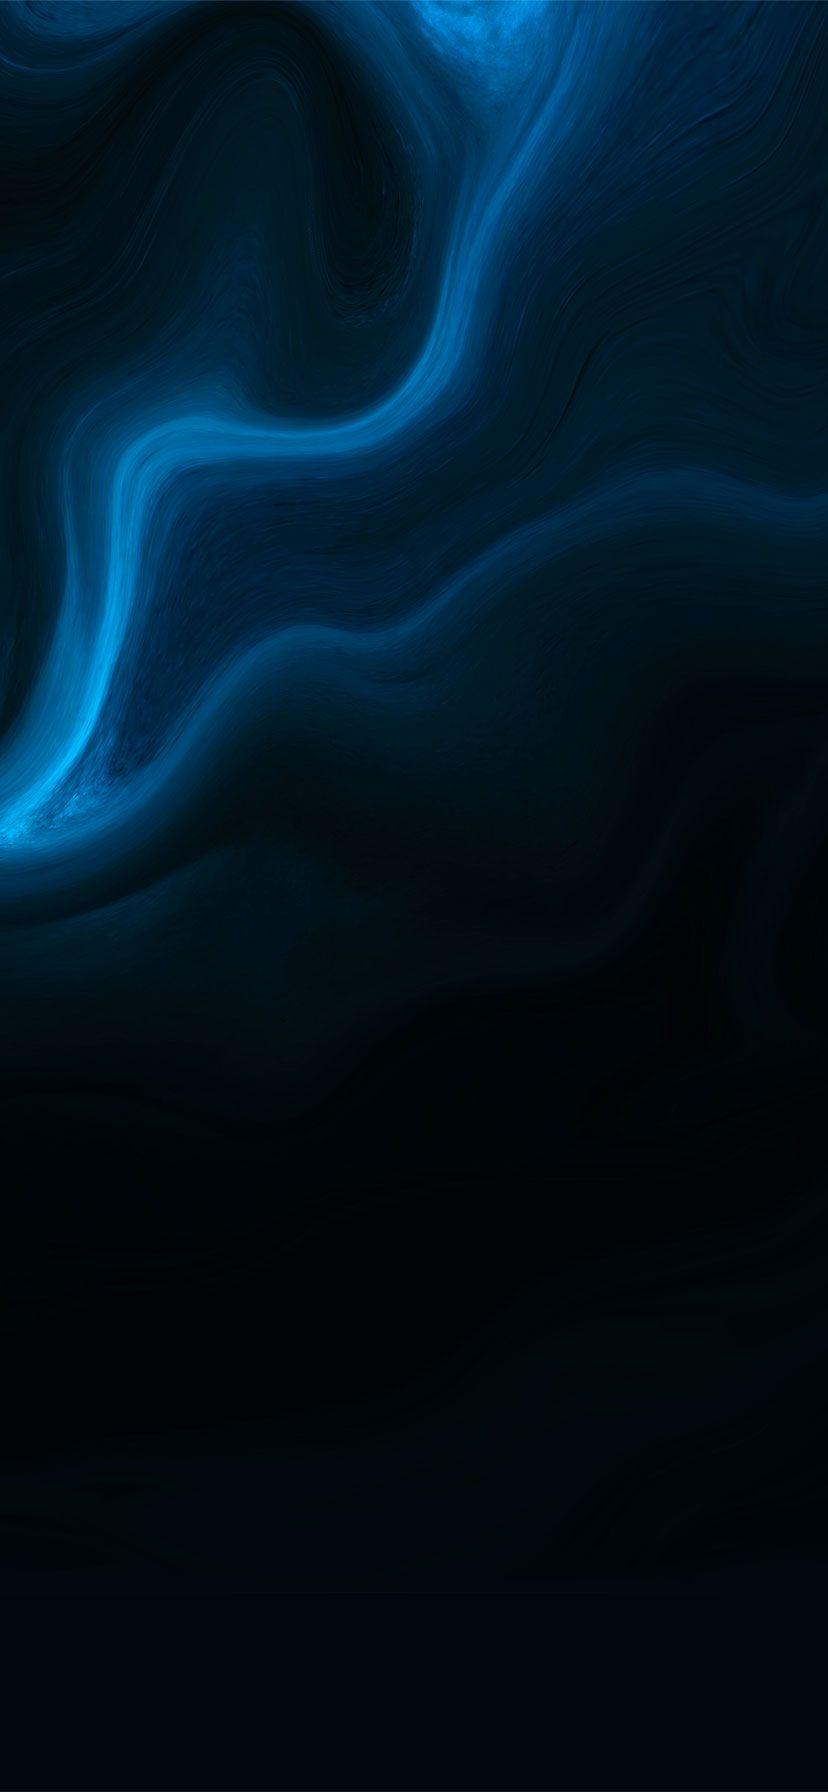 Dark Blue Abstract Iphone Wallpapers - Top Free Dark Blue Abstract